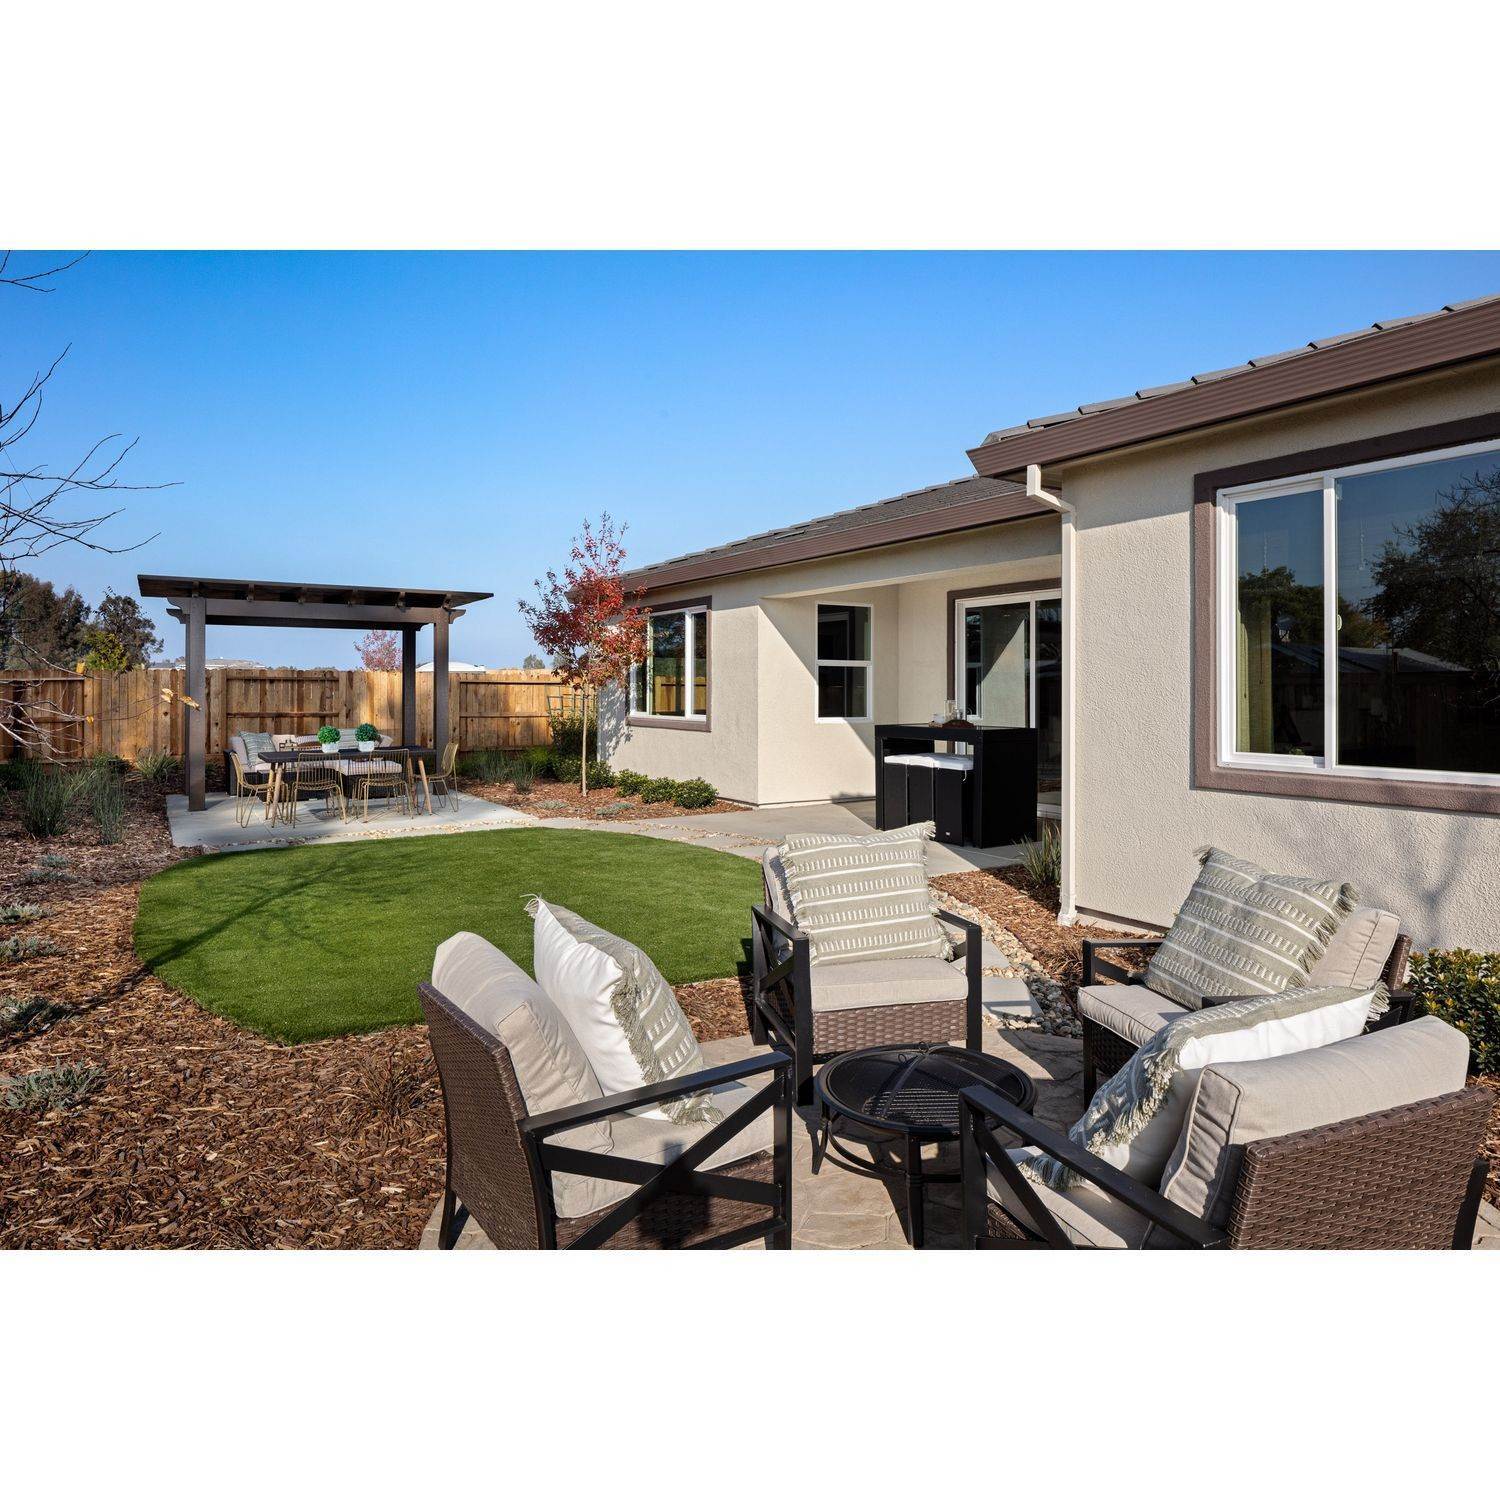 28. Cresleigh Havenwood xây dựng tại 758 Havenwood Drive, Lincoln, CA 95648